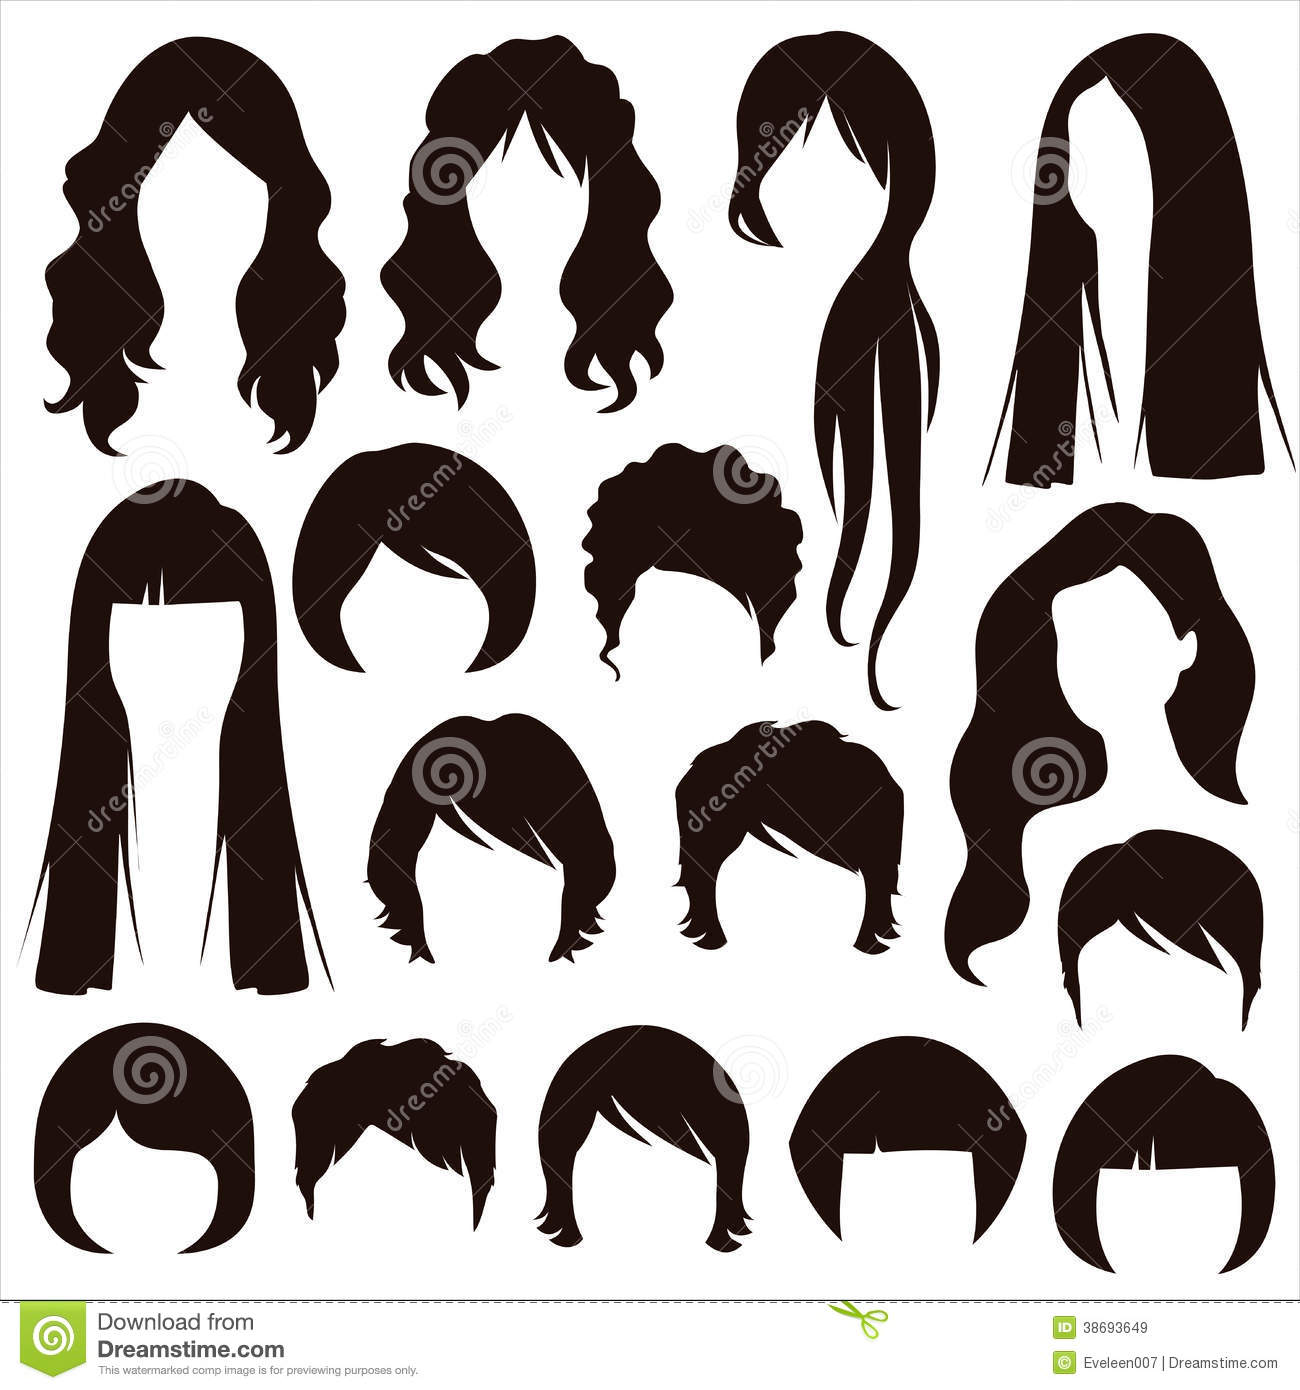 Hair Silhouettes Woman Hairstyle Royalty Free Stock Images   Image